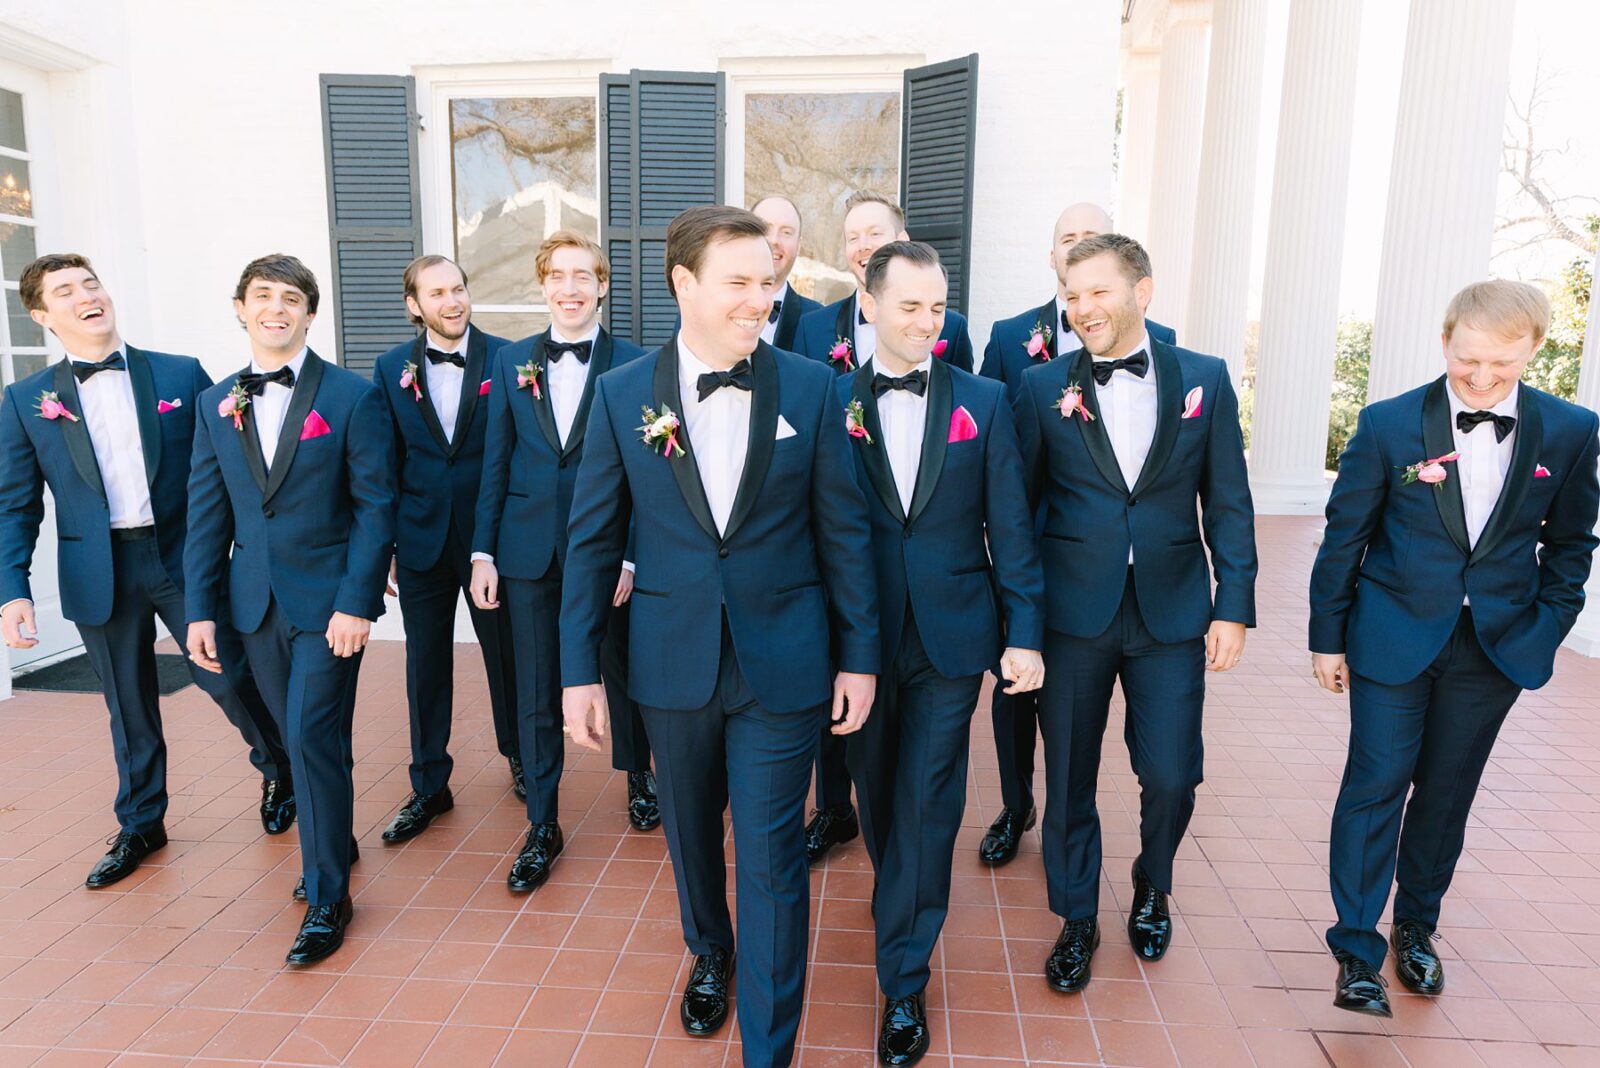 groom and groomsmen, large wedding party, twelve groomsmen, pink pocket squares for wedding, pink wedding details for groom, navy and black wedding suits, at Woodbine mansion in round rock texas, wedding photos by Tara Lyons Photography, planning by The event shop